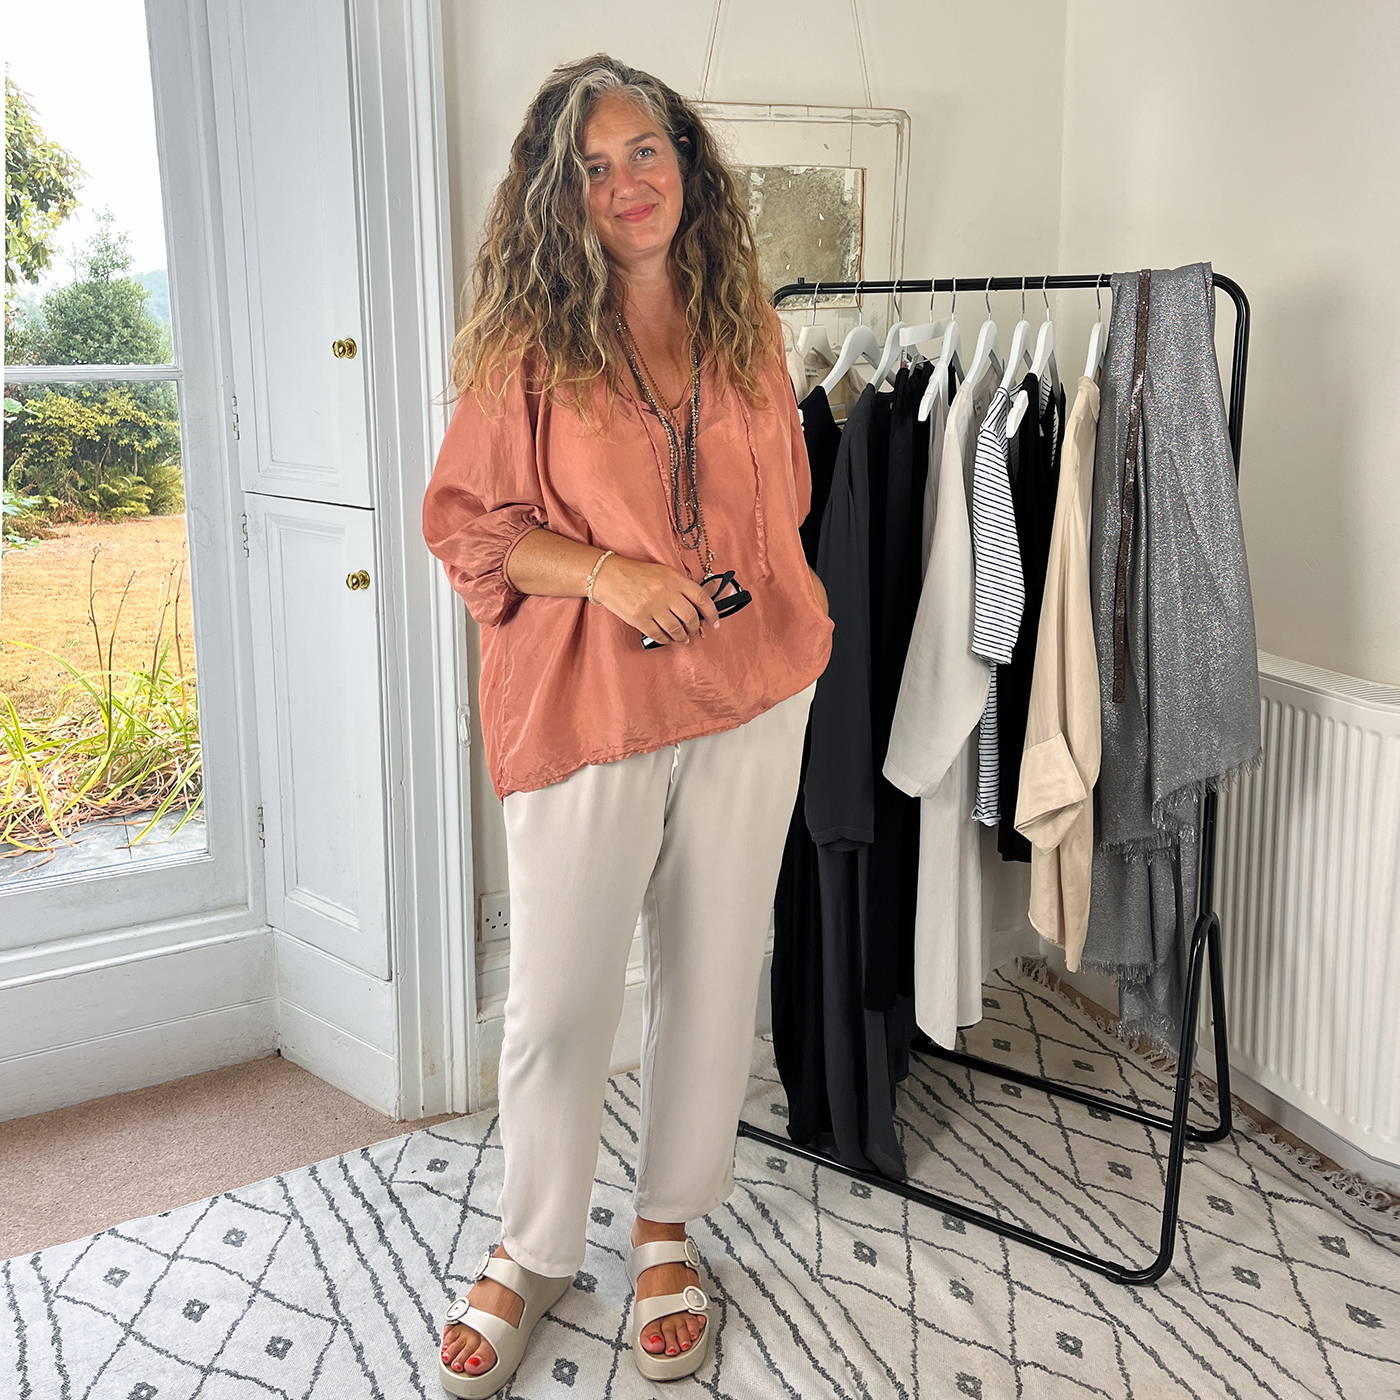 Emma wearing coral blouse and neutral trousers.